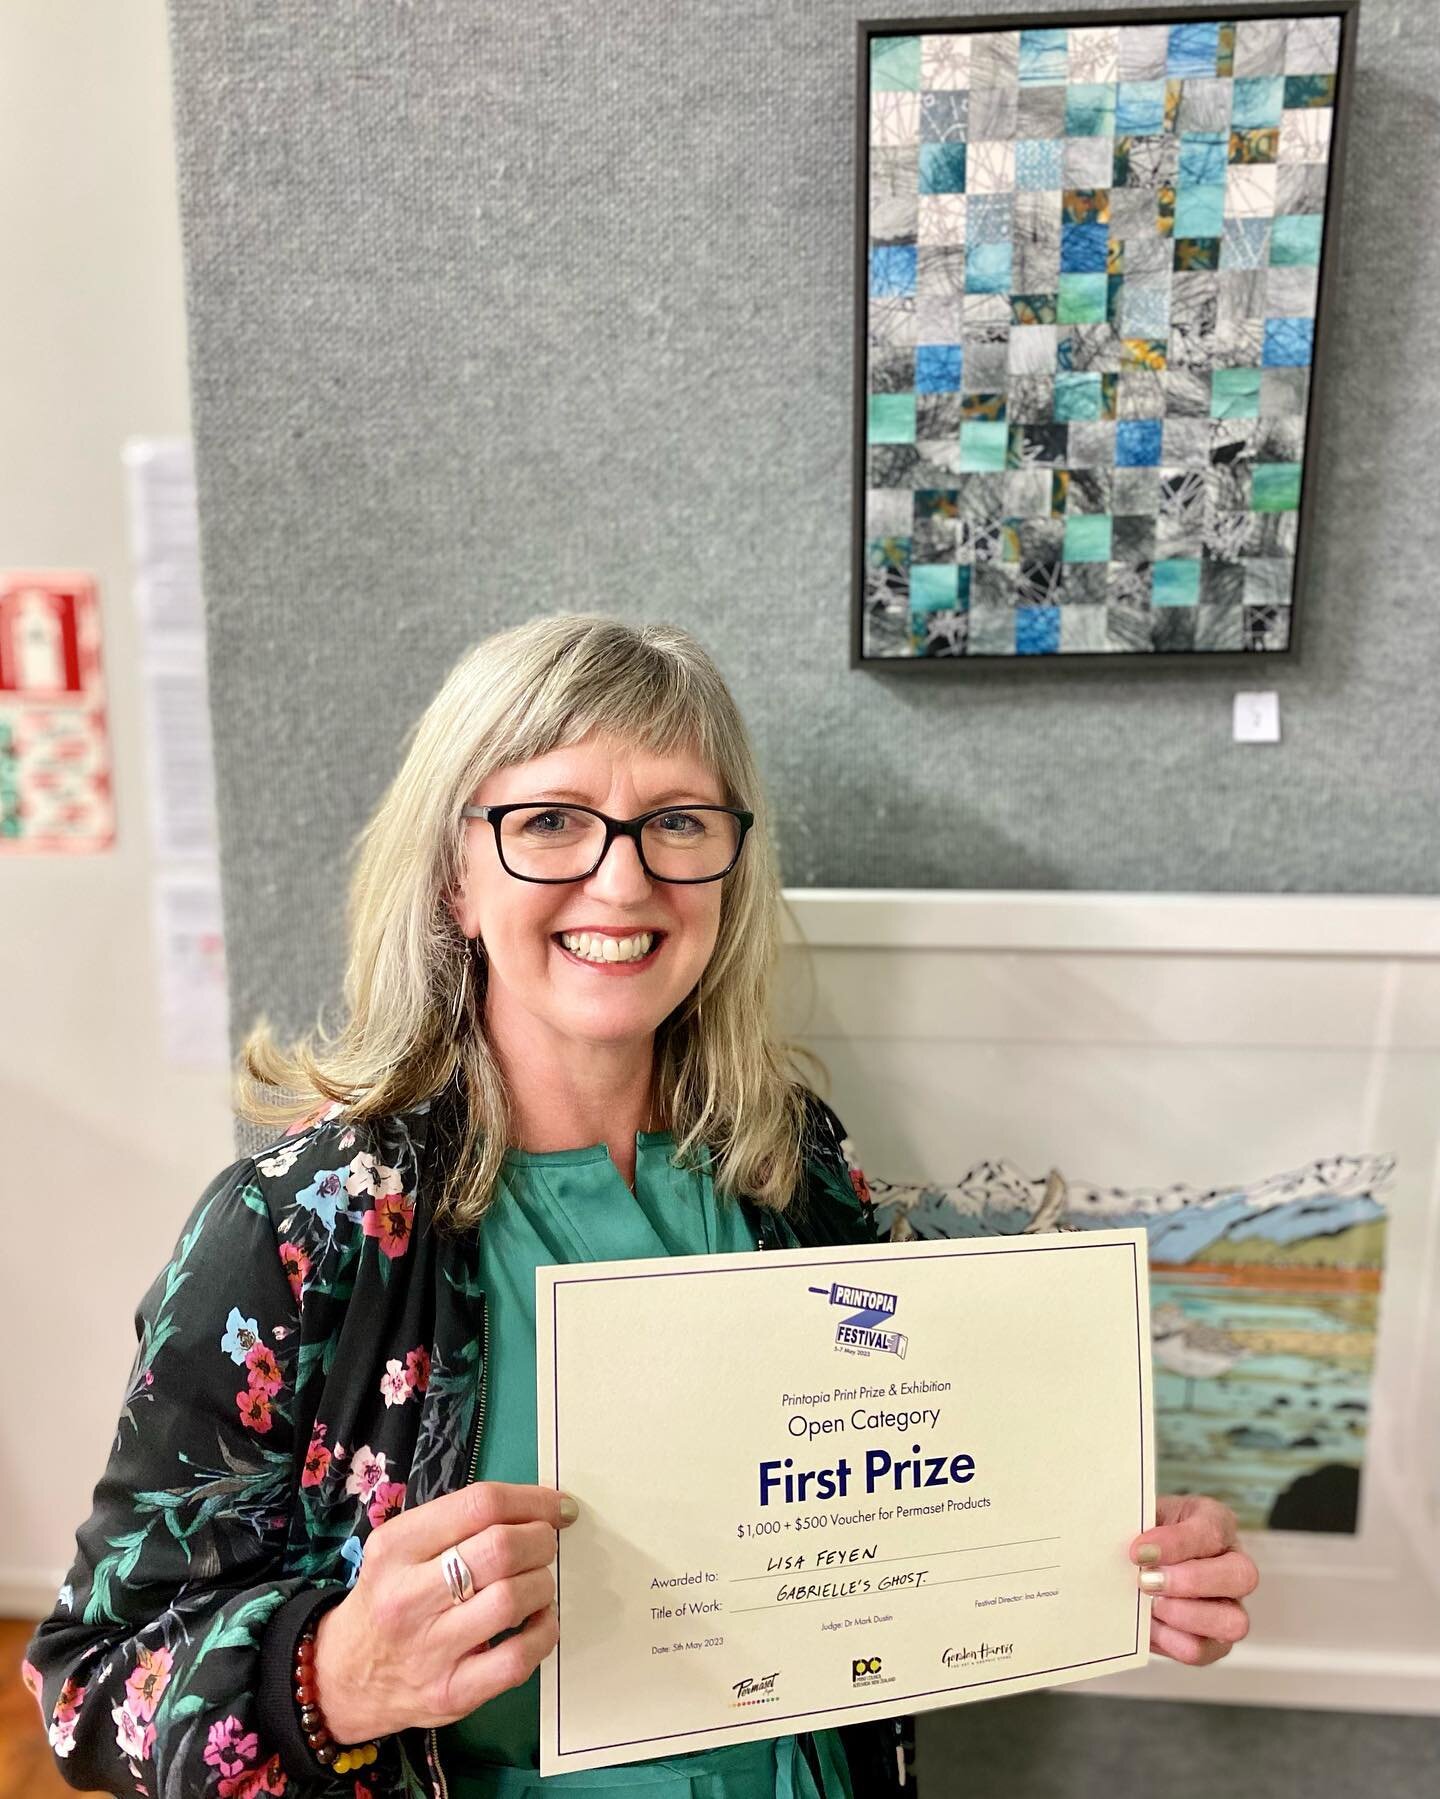 Still stunned to have won first prize in the Printopia festival exhibition open section! 😳❤️Thank you judge Dr Mark Dustin, organiser @inaarraoui and the generous sponsors @permaset_aqua @printcouncilnz @gordonharrisartsupplies 
What a wonderful pri